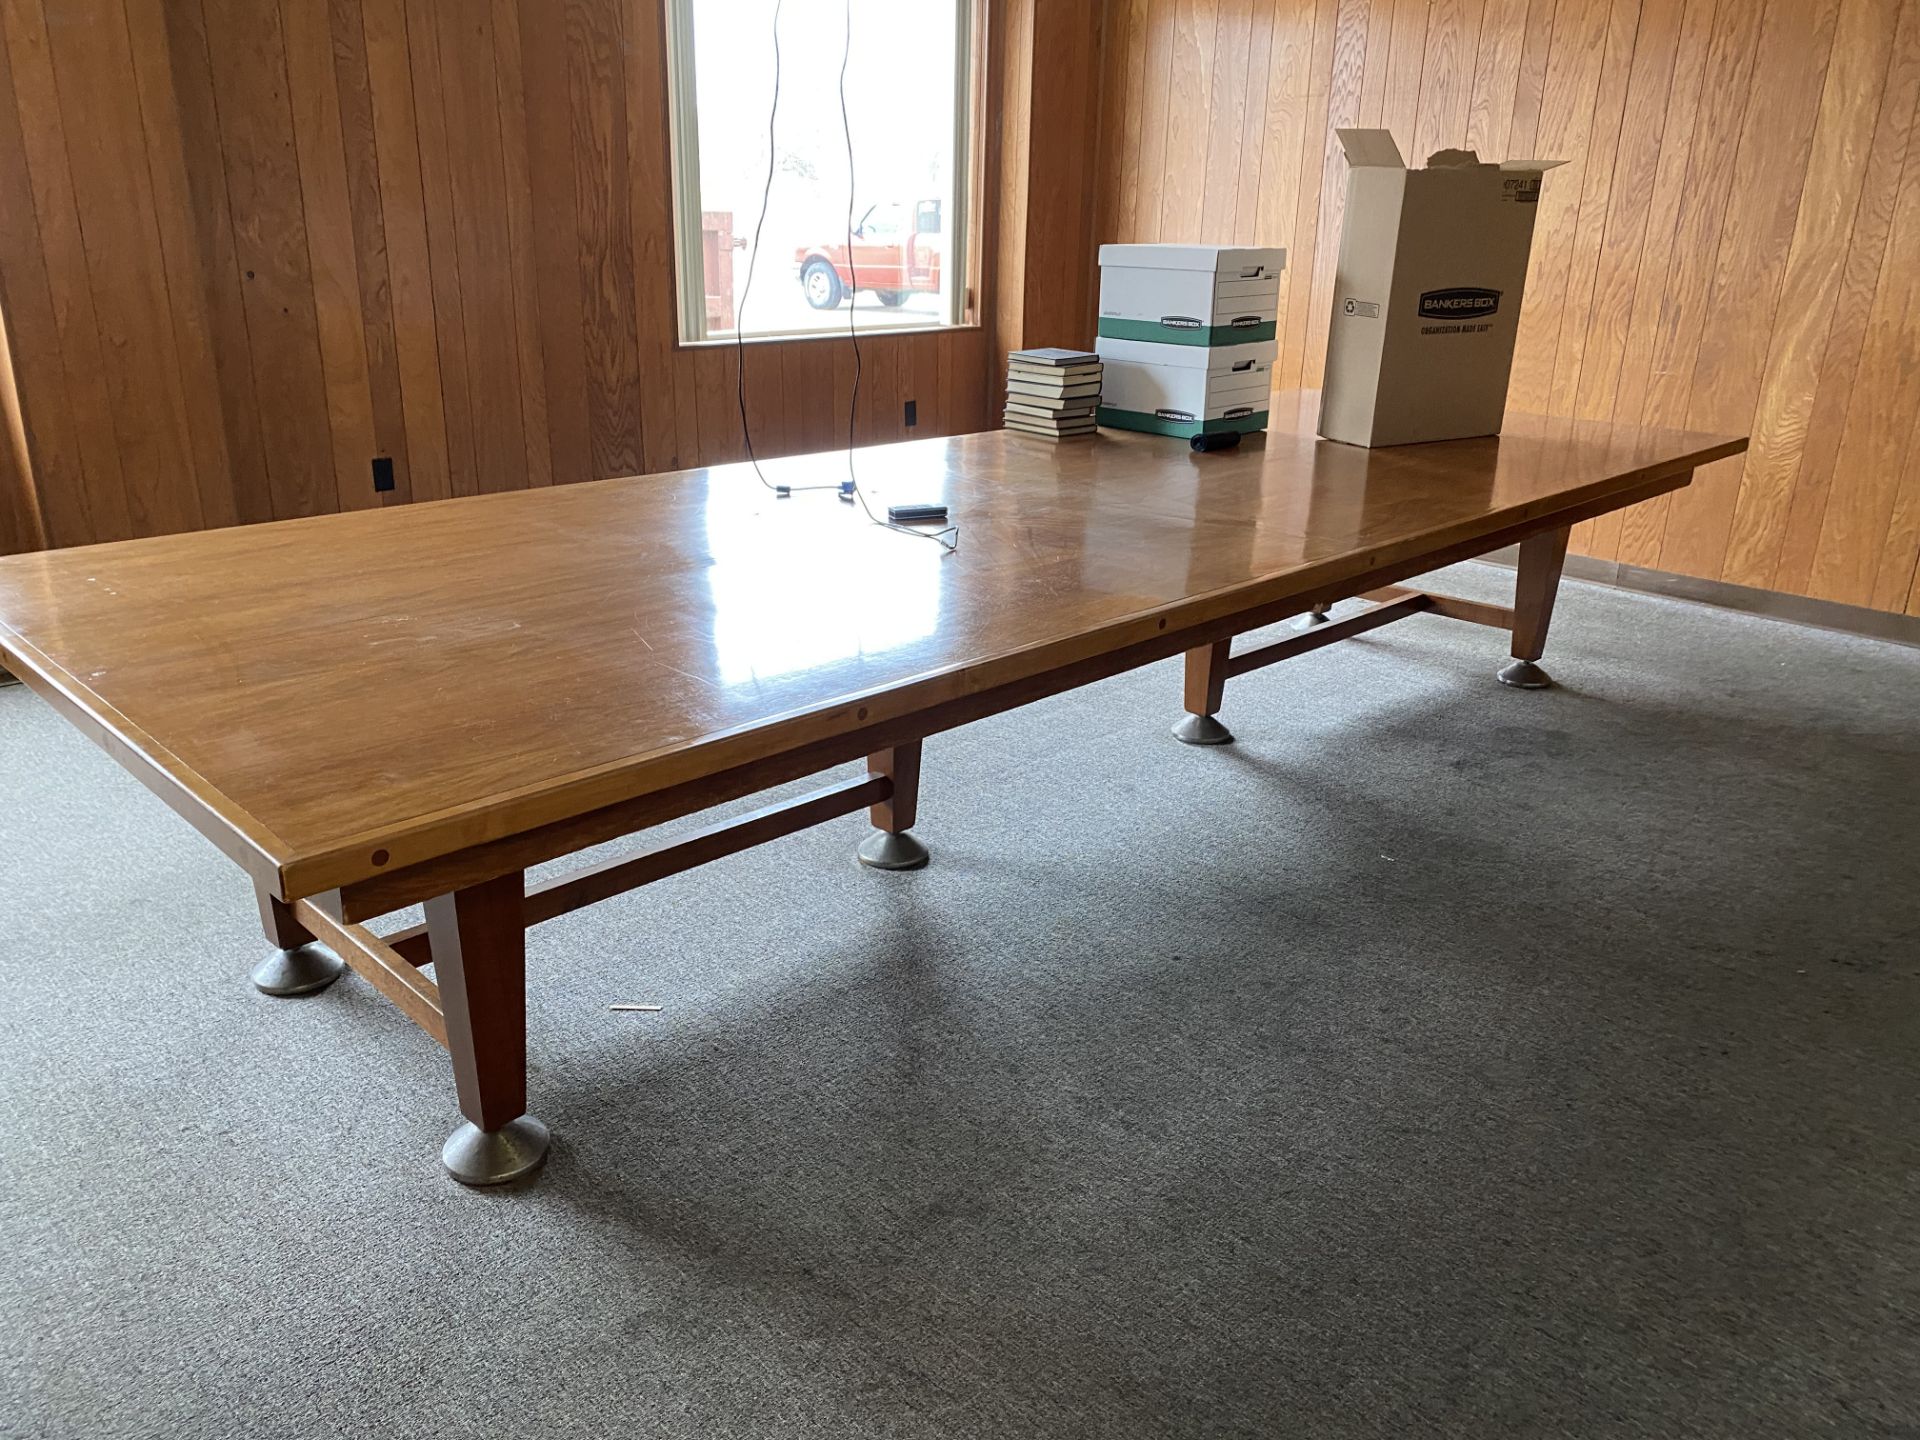 CONFERENCE ROOM TABLE - $100.00 Rigging Fee Due to Onsite Rigger - Located in Bryan, Ohio - Image 2 of 2